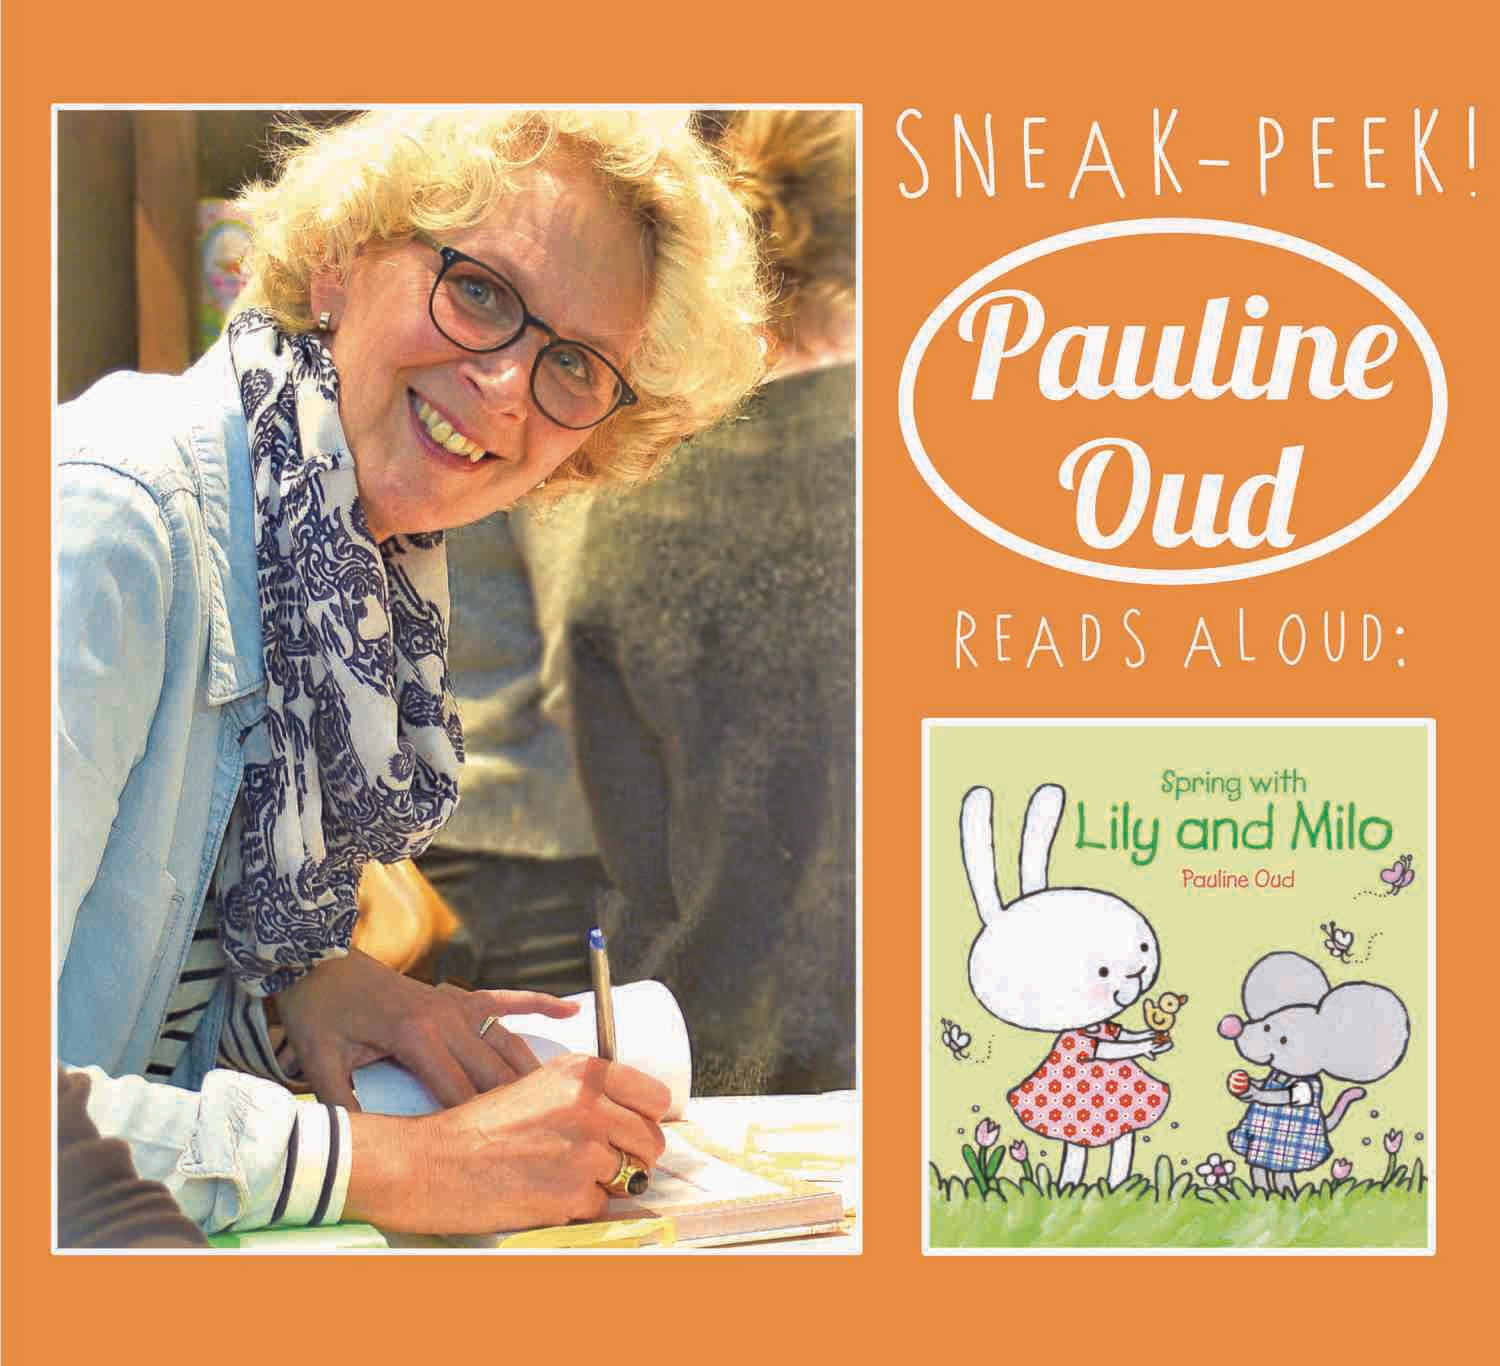 Pauline Oud Reads Aloud: Spring with Lily and Milo